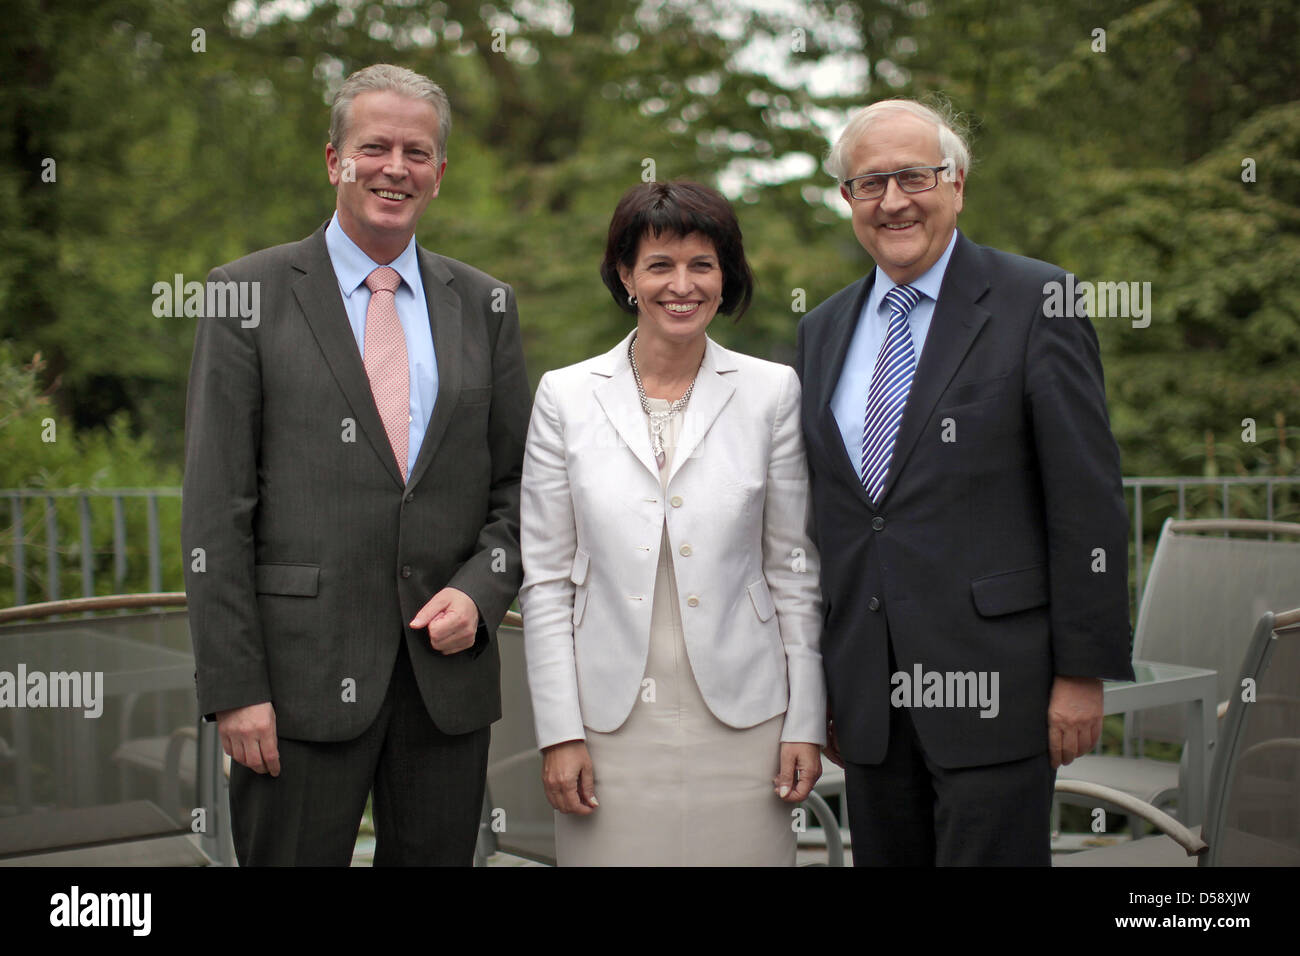 German Economy Minister Rainer Bruederle (R), his Austrian counterpart Reinhold Mittellehner (L) and Swiss Economy Minister Doris Leuthard stand together for a group photo outside Hotel Favourit in Mainz, Germany, 28 May 2010. The economy ministers of the three countreis hold their traditional annual conference on 28 and 29 May. It is the 32nd meeting of this kind. Photo: FREDRIK V Stock Photo